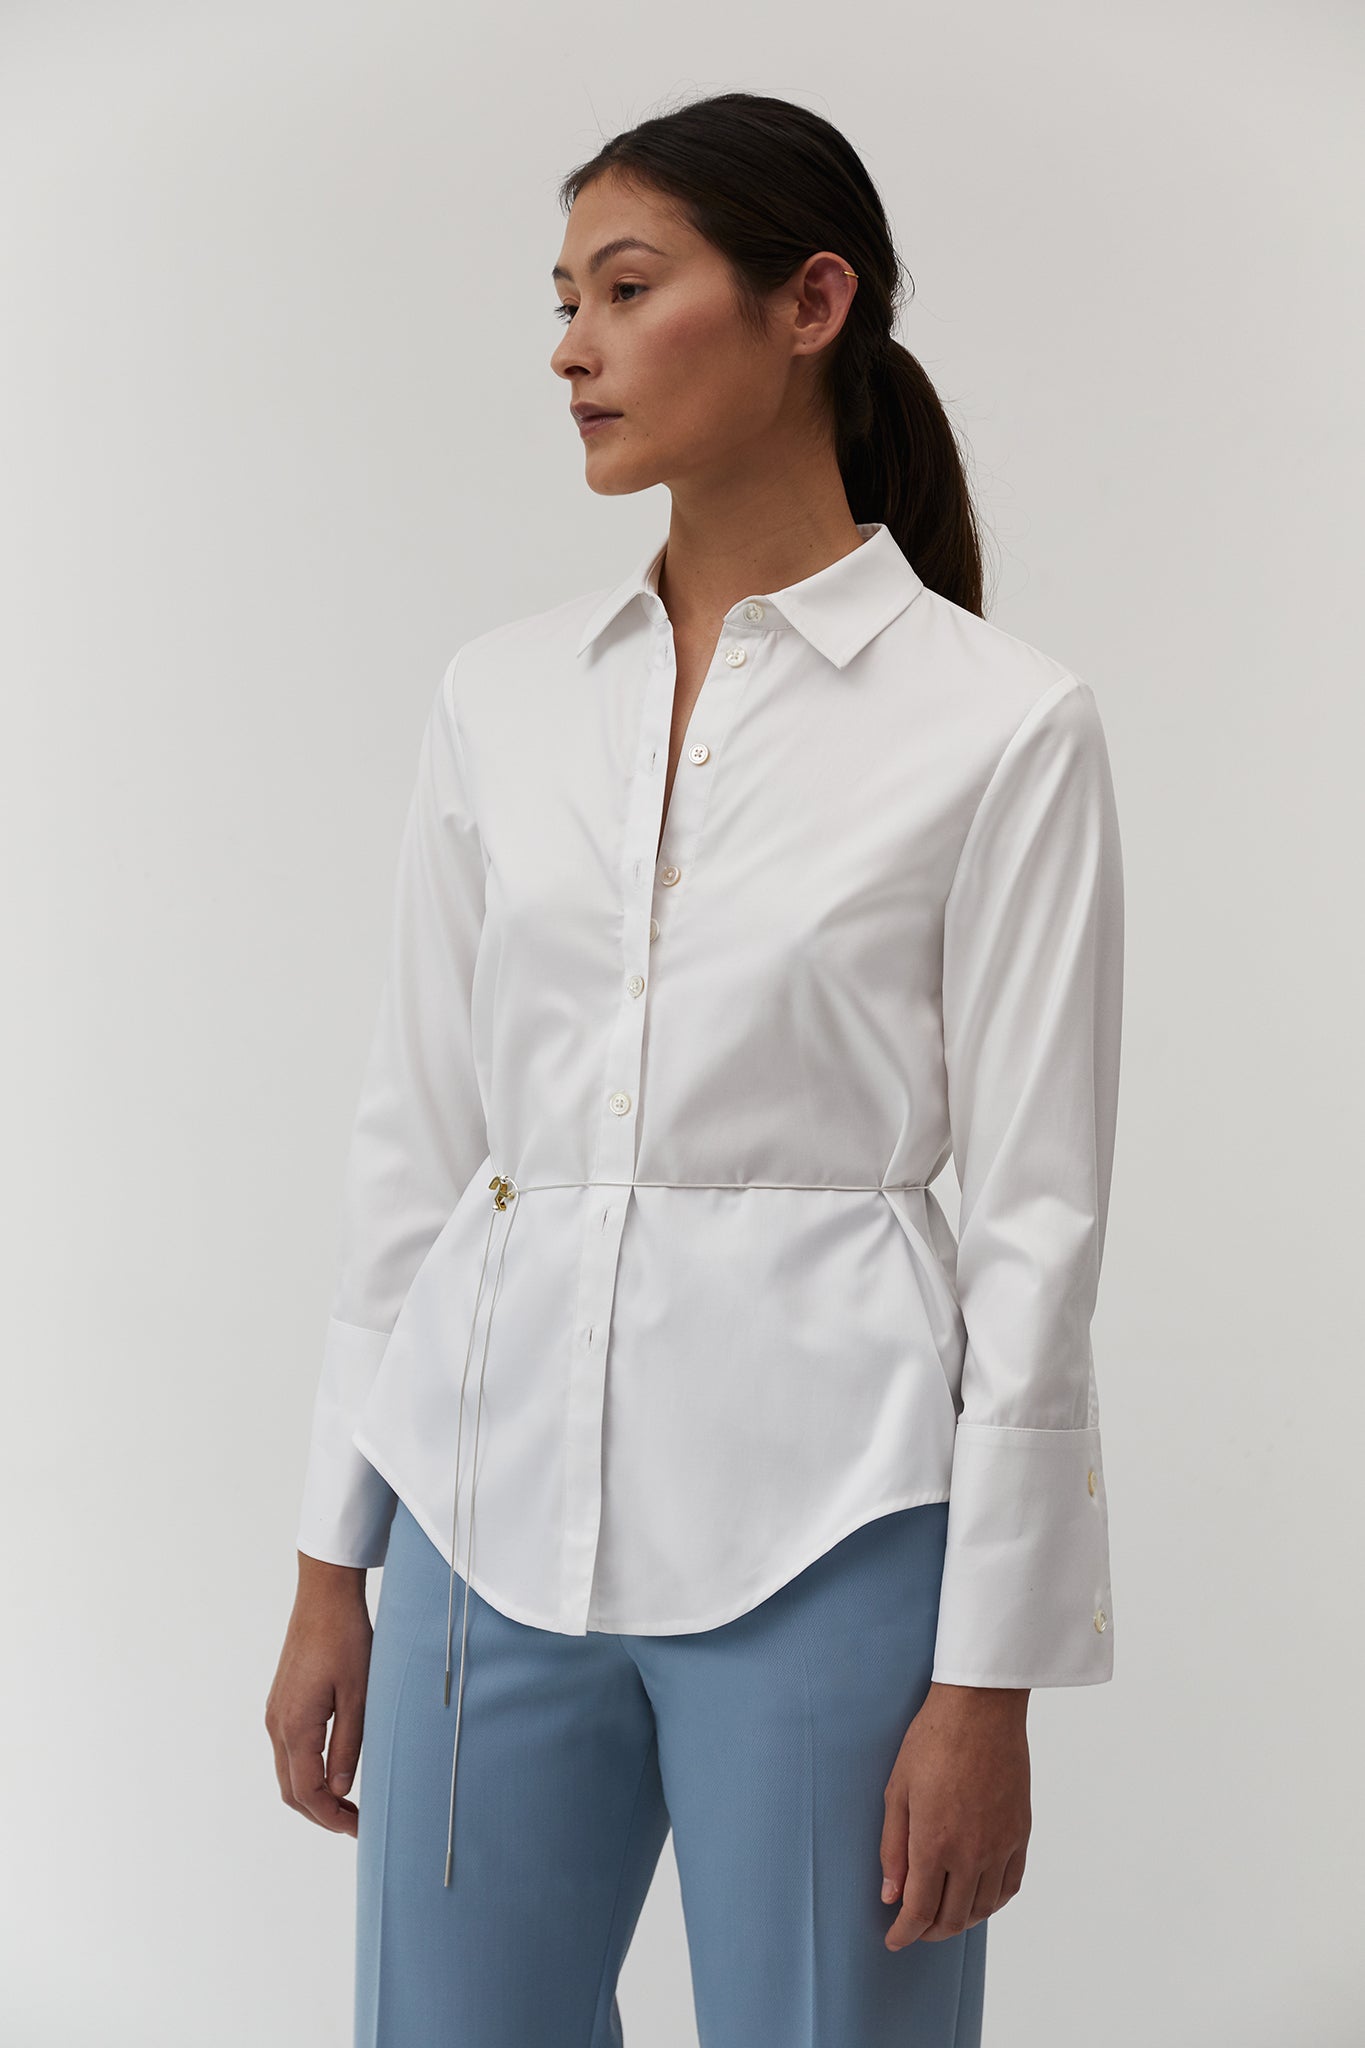 The Array womenswear fashion label london fashion brand workwear womens fashion Womens White Shirt in Quick Wrinkle Recovery Cotton 